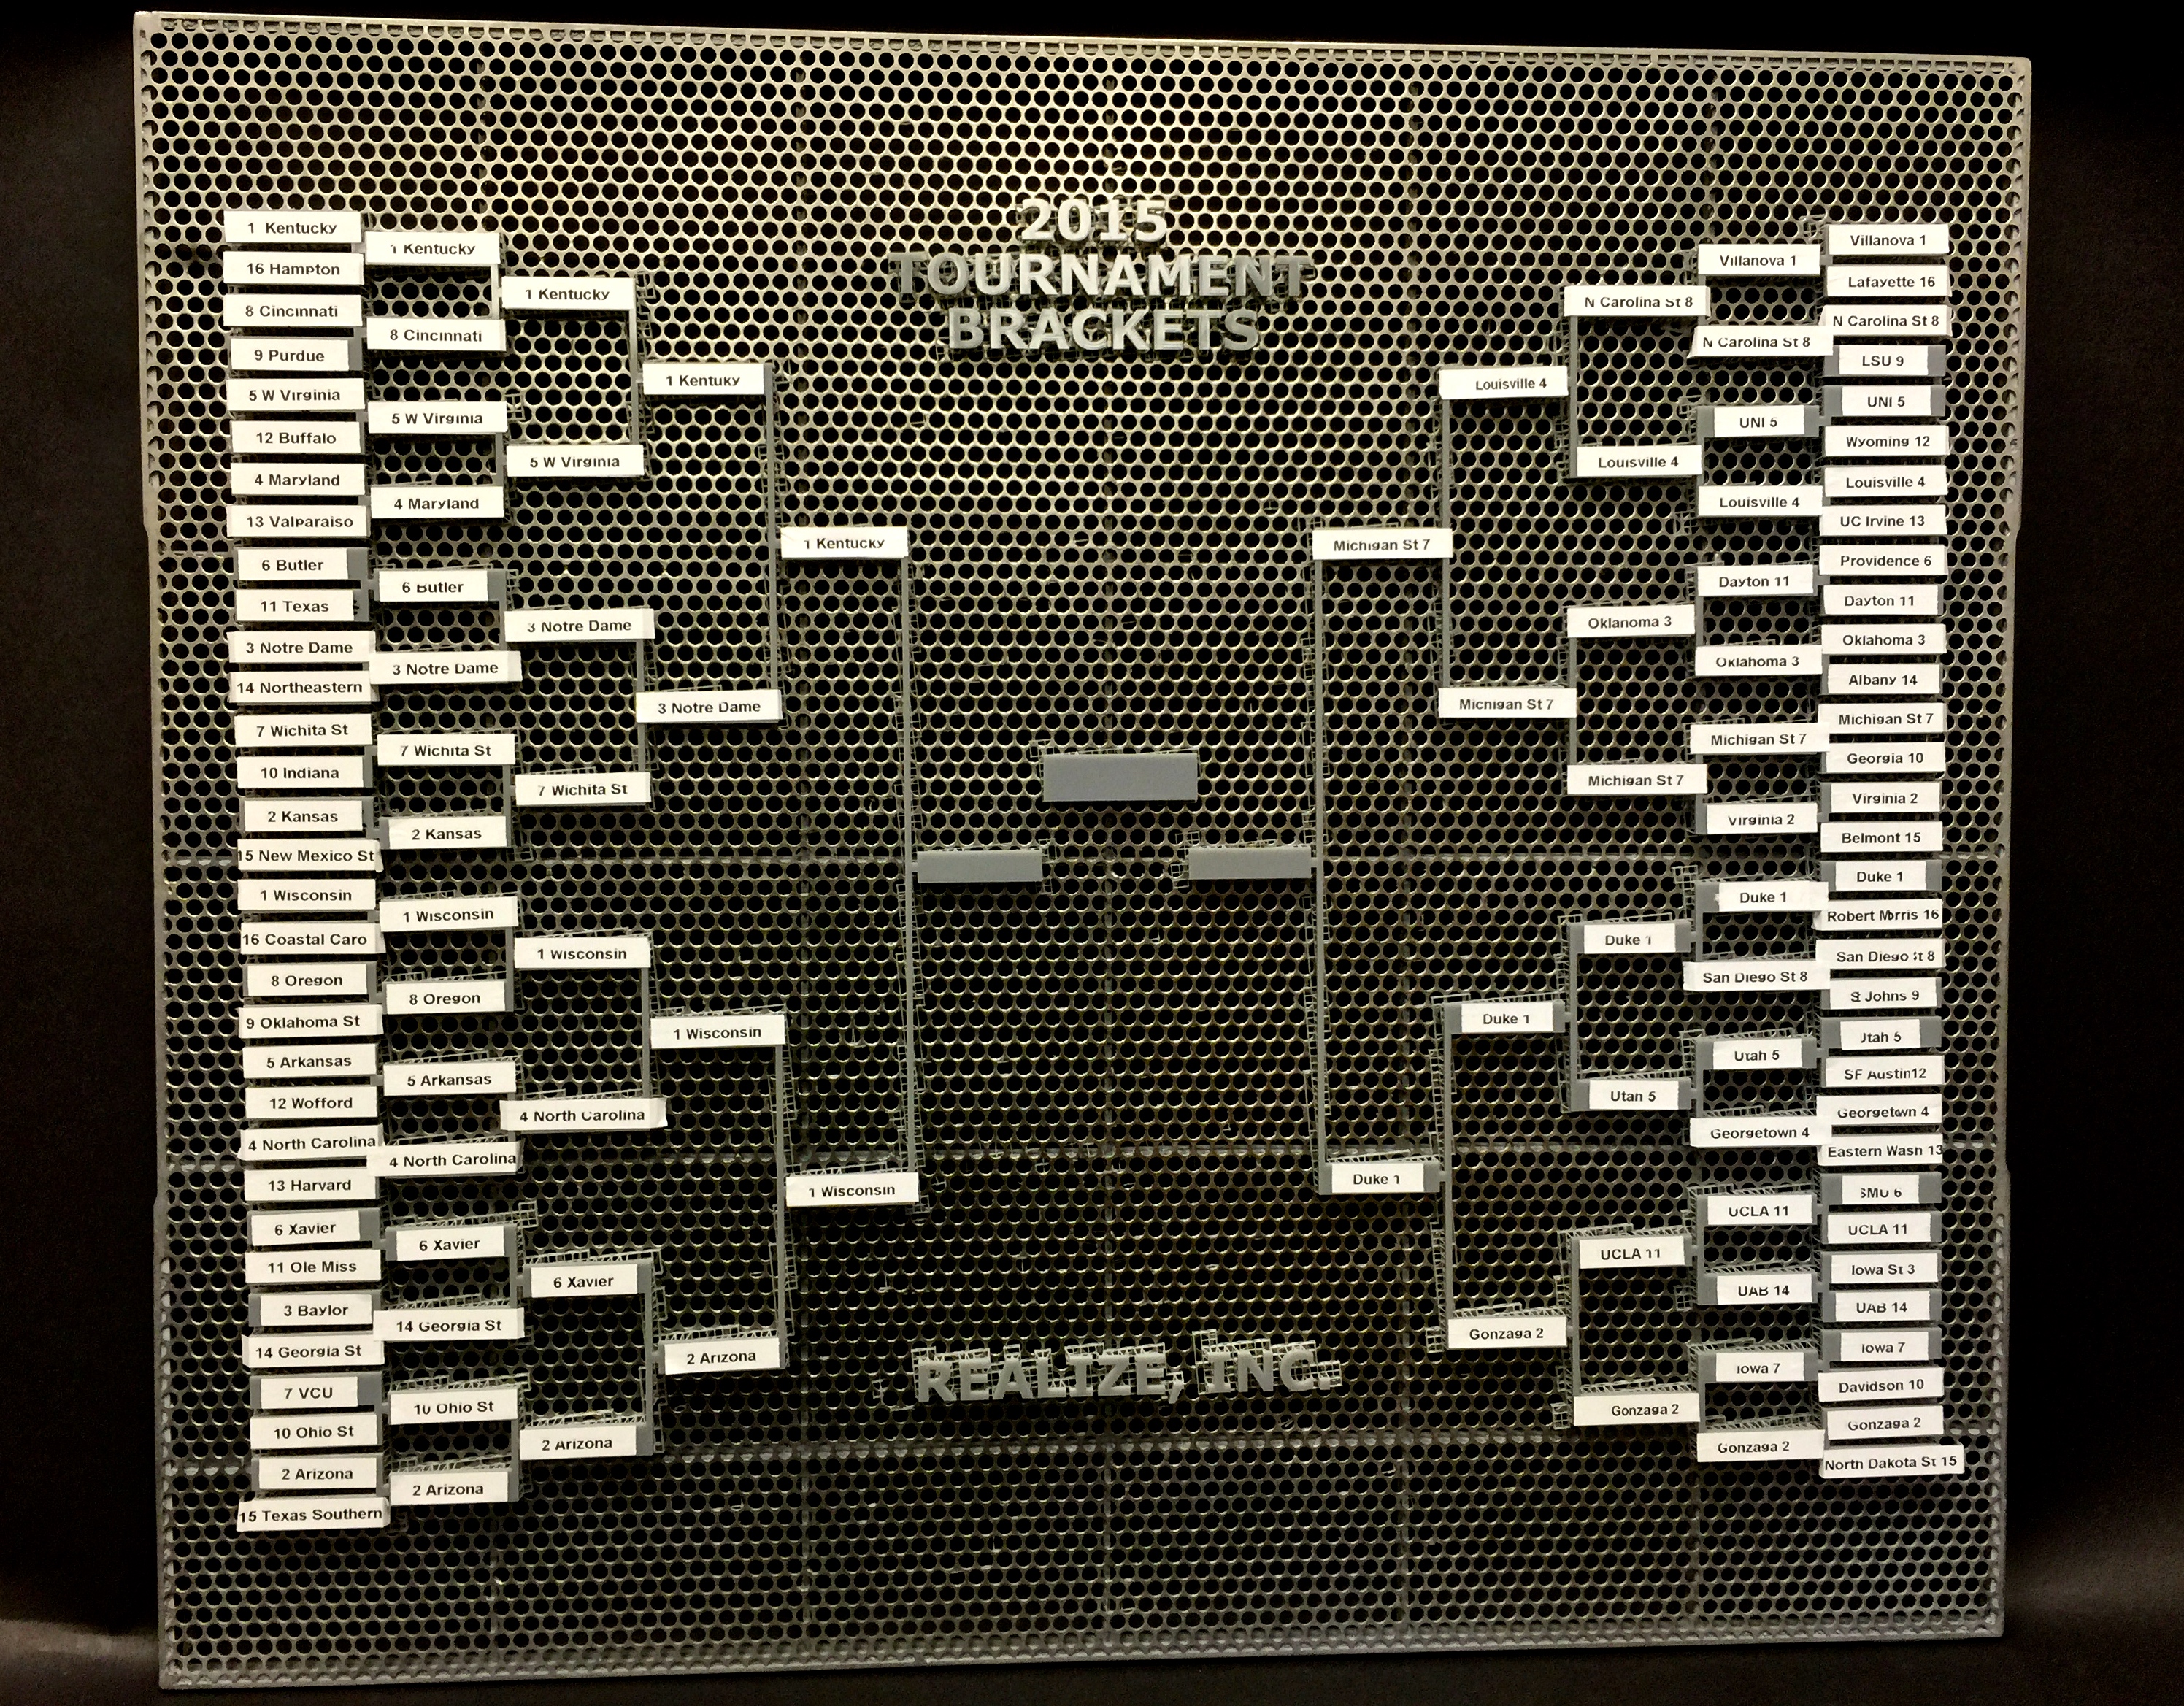 World’s First 3D Printed College Hoops Tournament Bracket